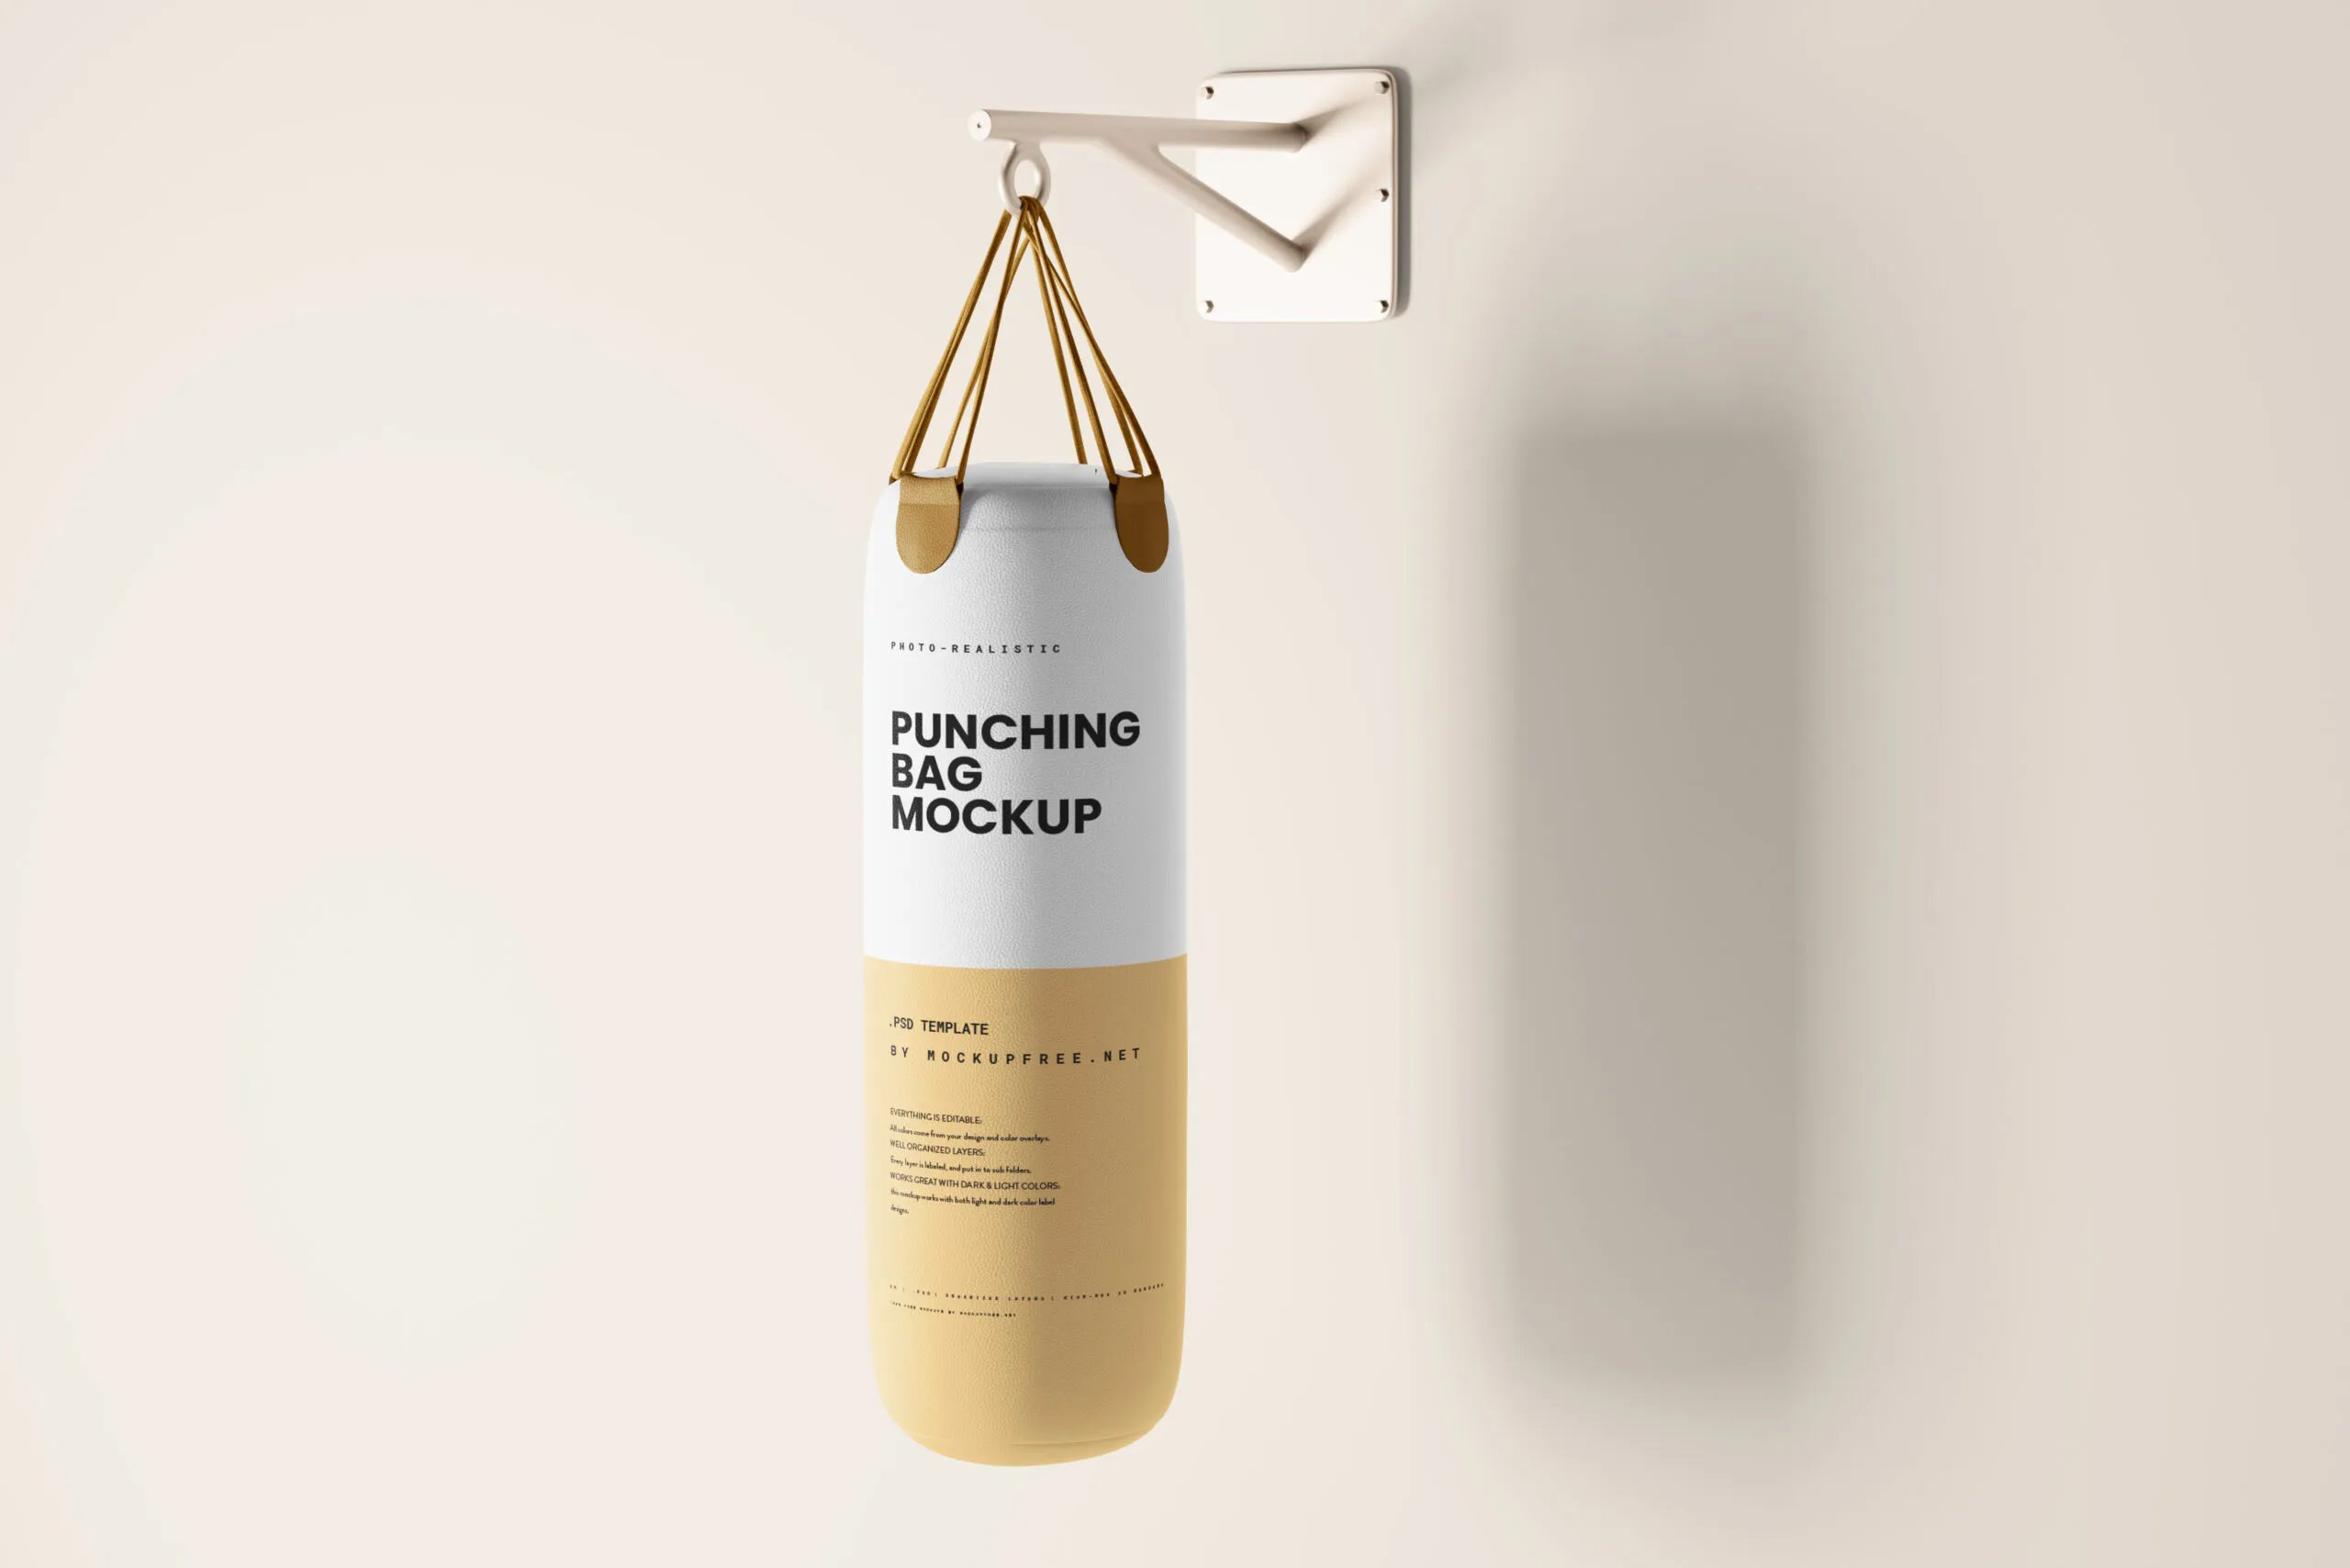 3 Punching Bag Mockups in Different Shots FREE PSD